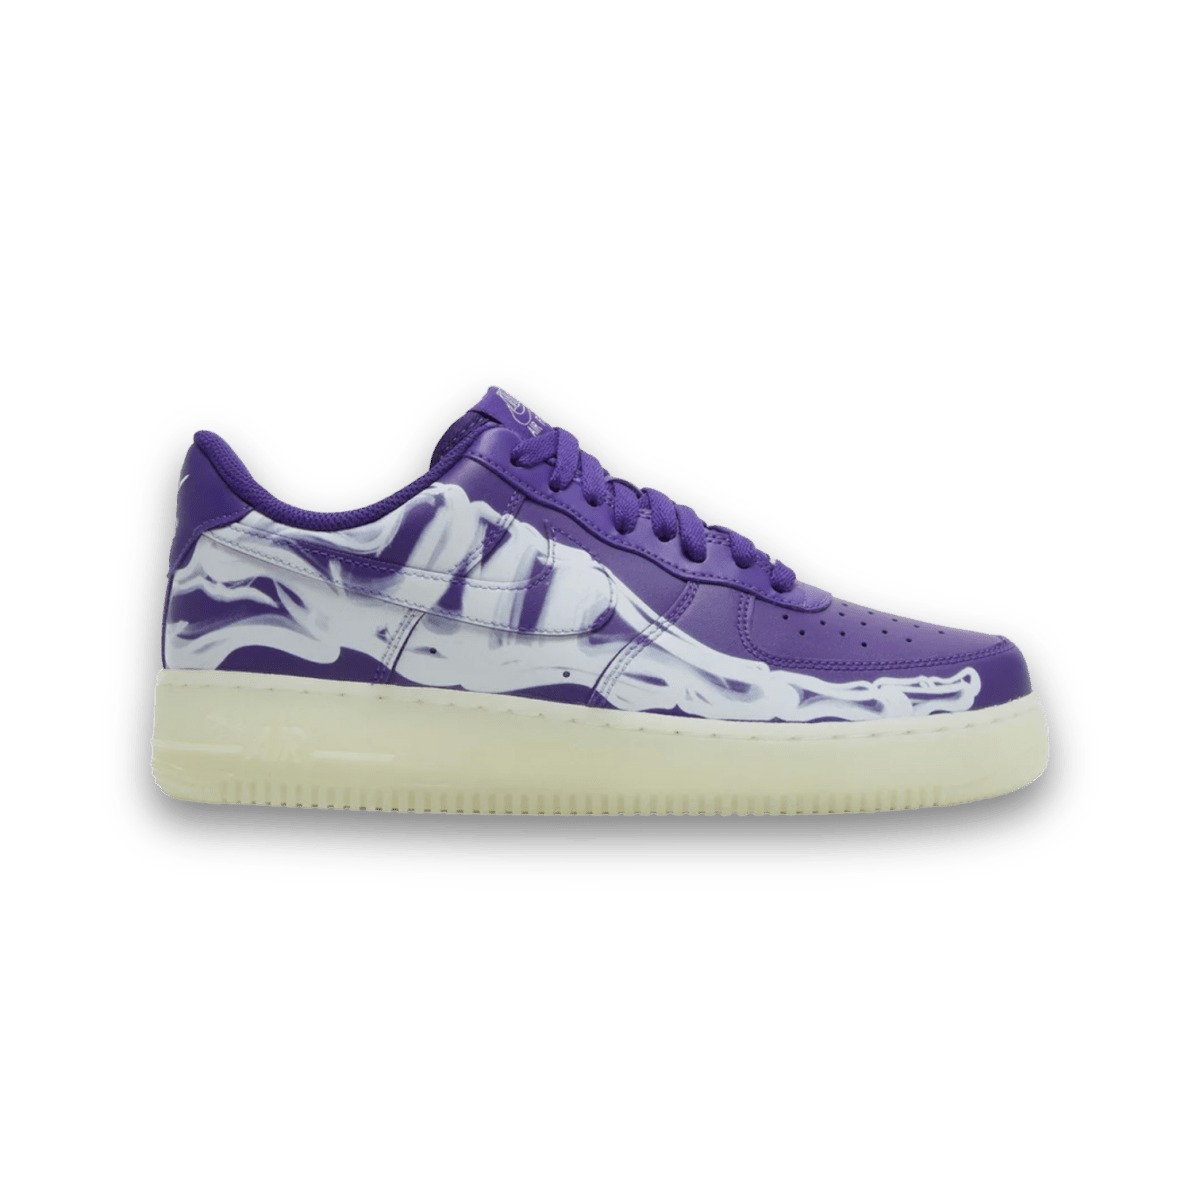 Air Force 1 Low 'Purple Skeleton' - Jawns on Fire